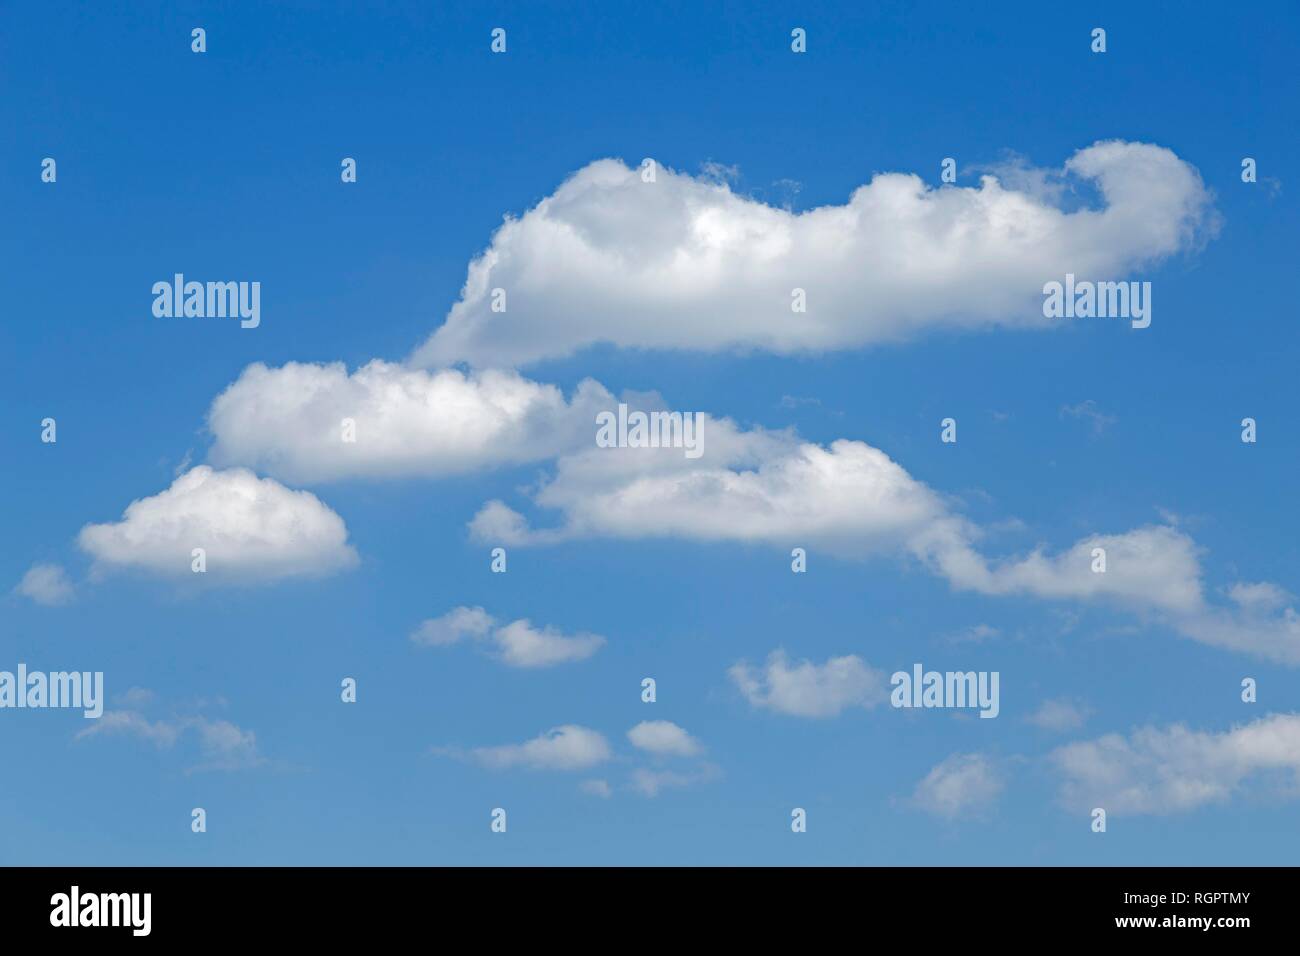 Clouds in the blue sky, Baden-Württemberg, Germany Stock Photo